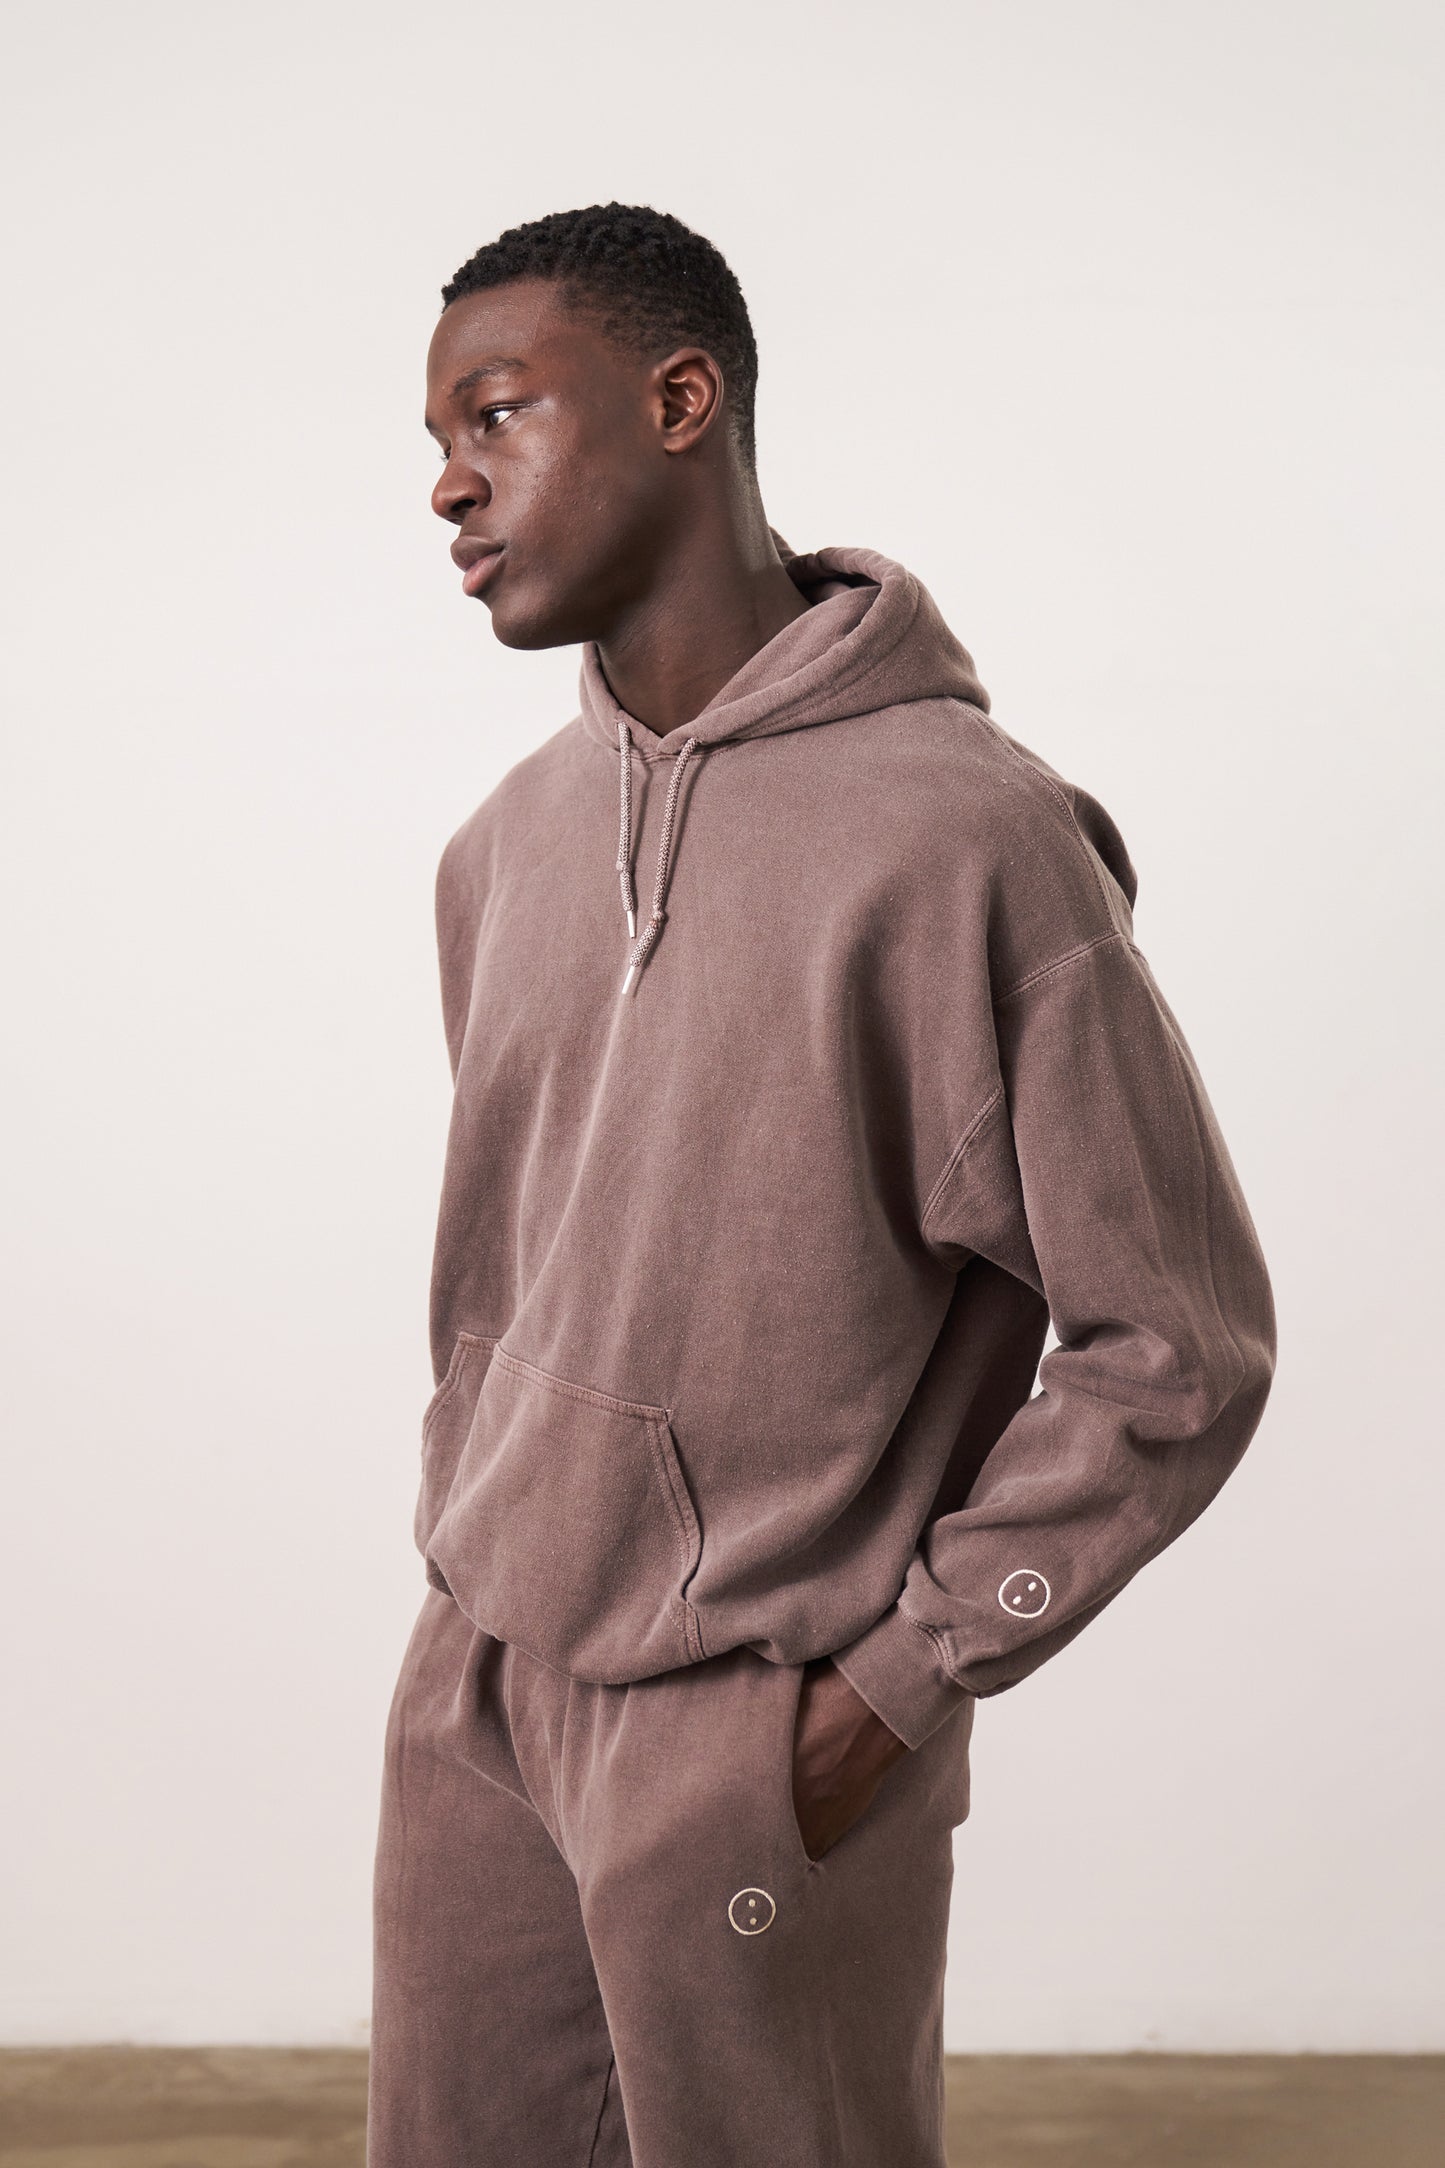 Essentials Vintage Washed Hoodie - Cocoa